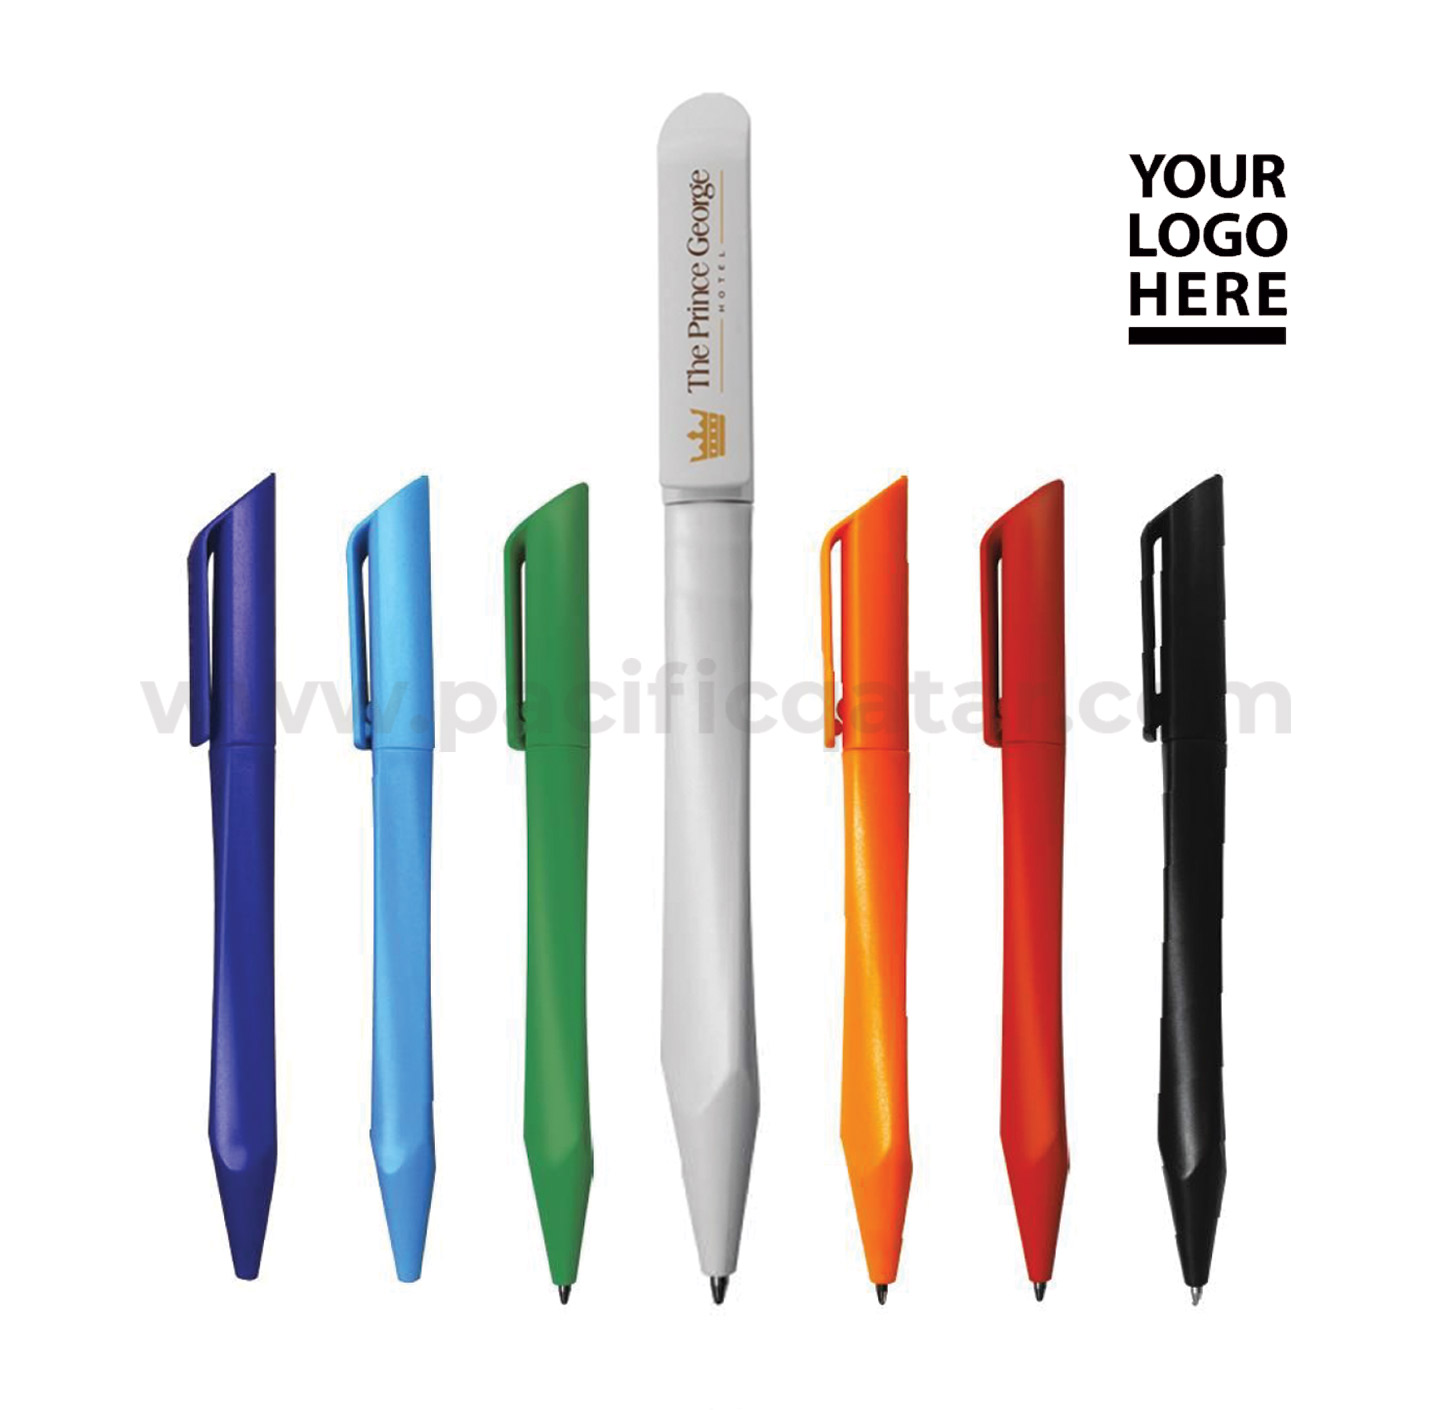 Plastic pen with logo and various color